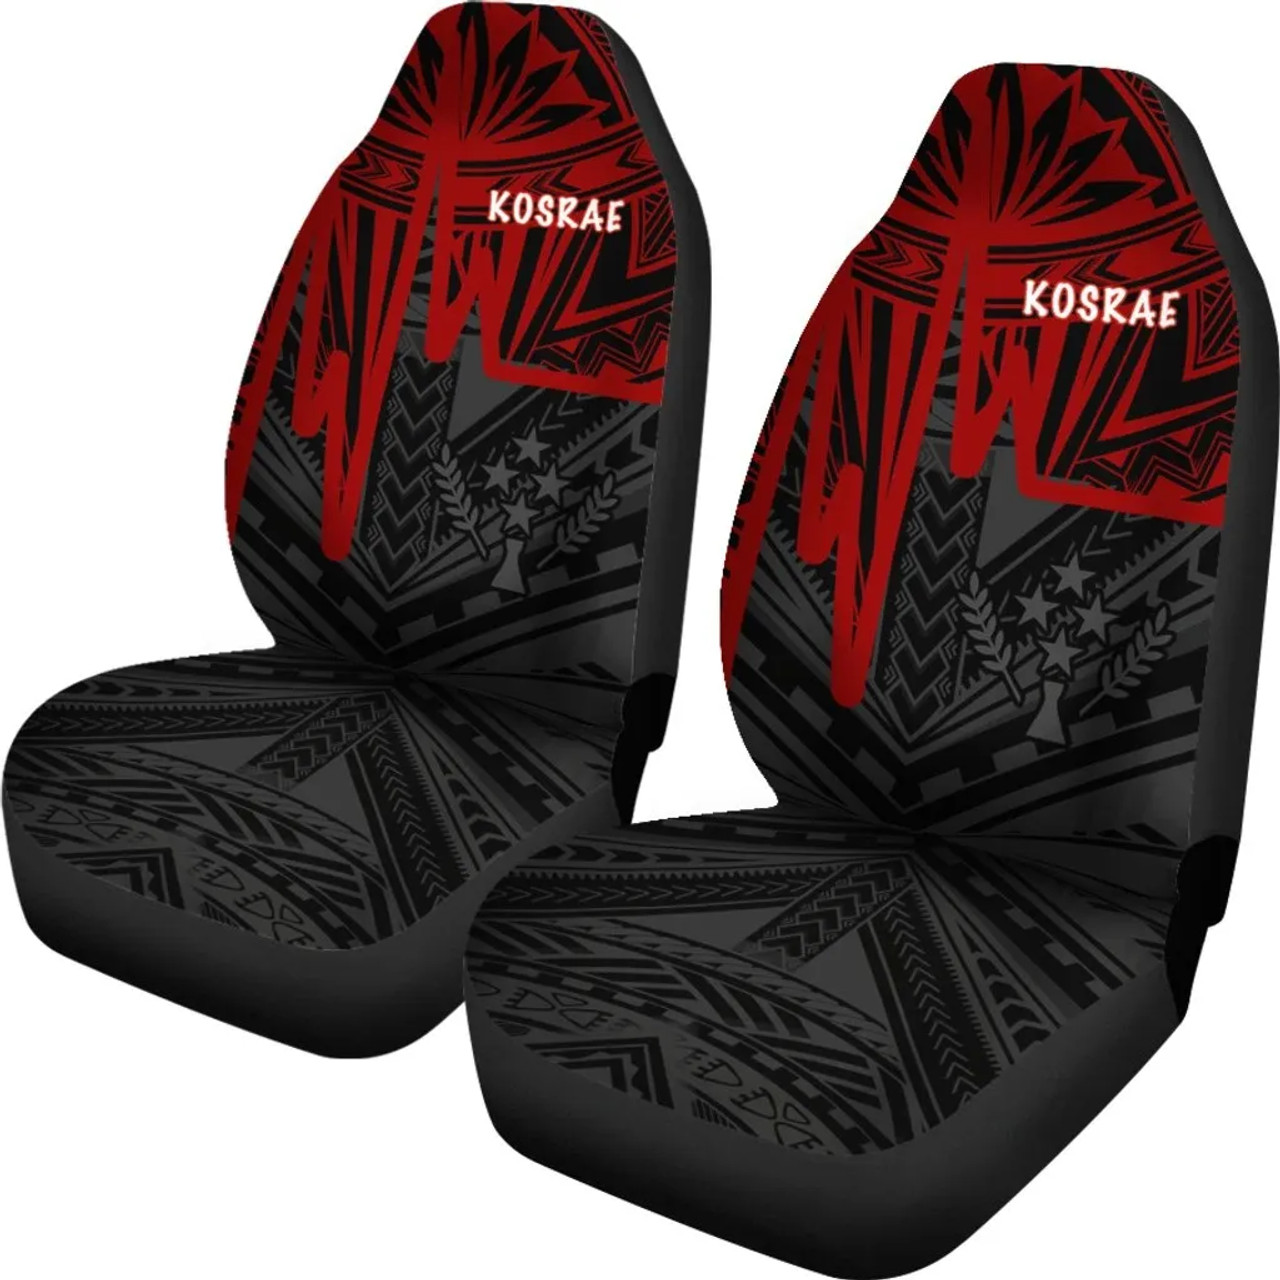 Kosrae Car Seat Covers - Kosrae Seal In Heartbeat Patterns Style (Red)